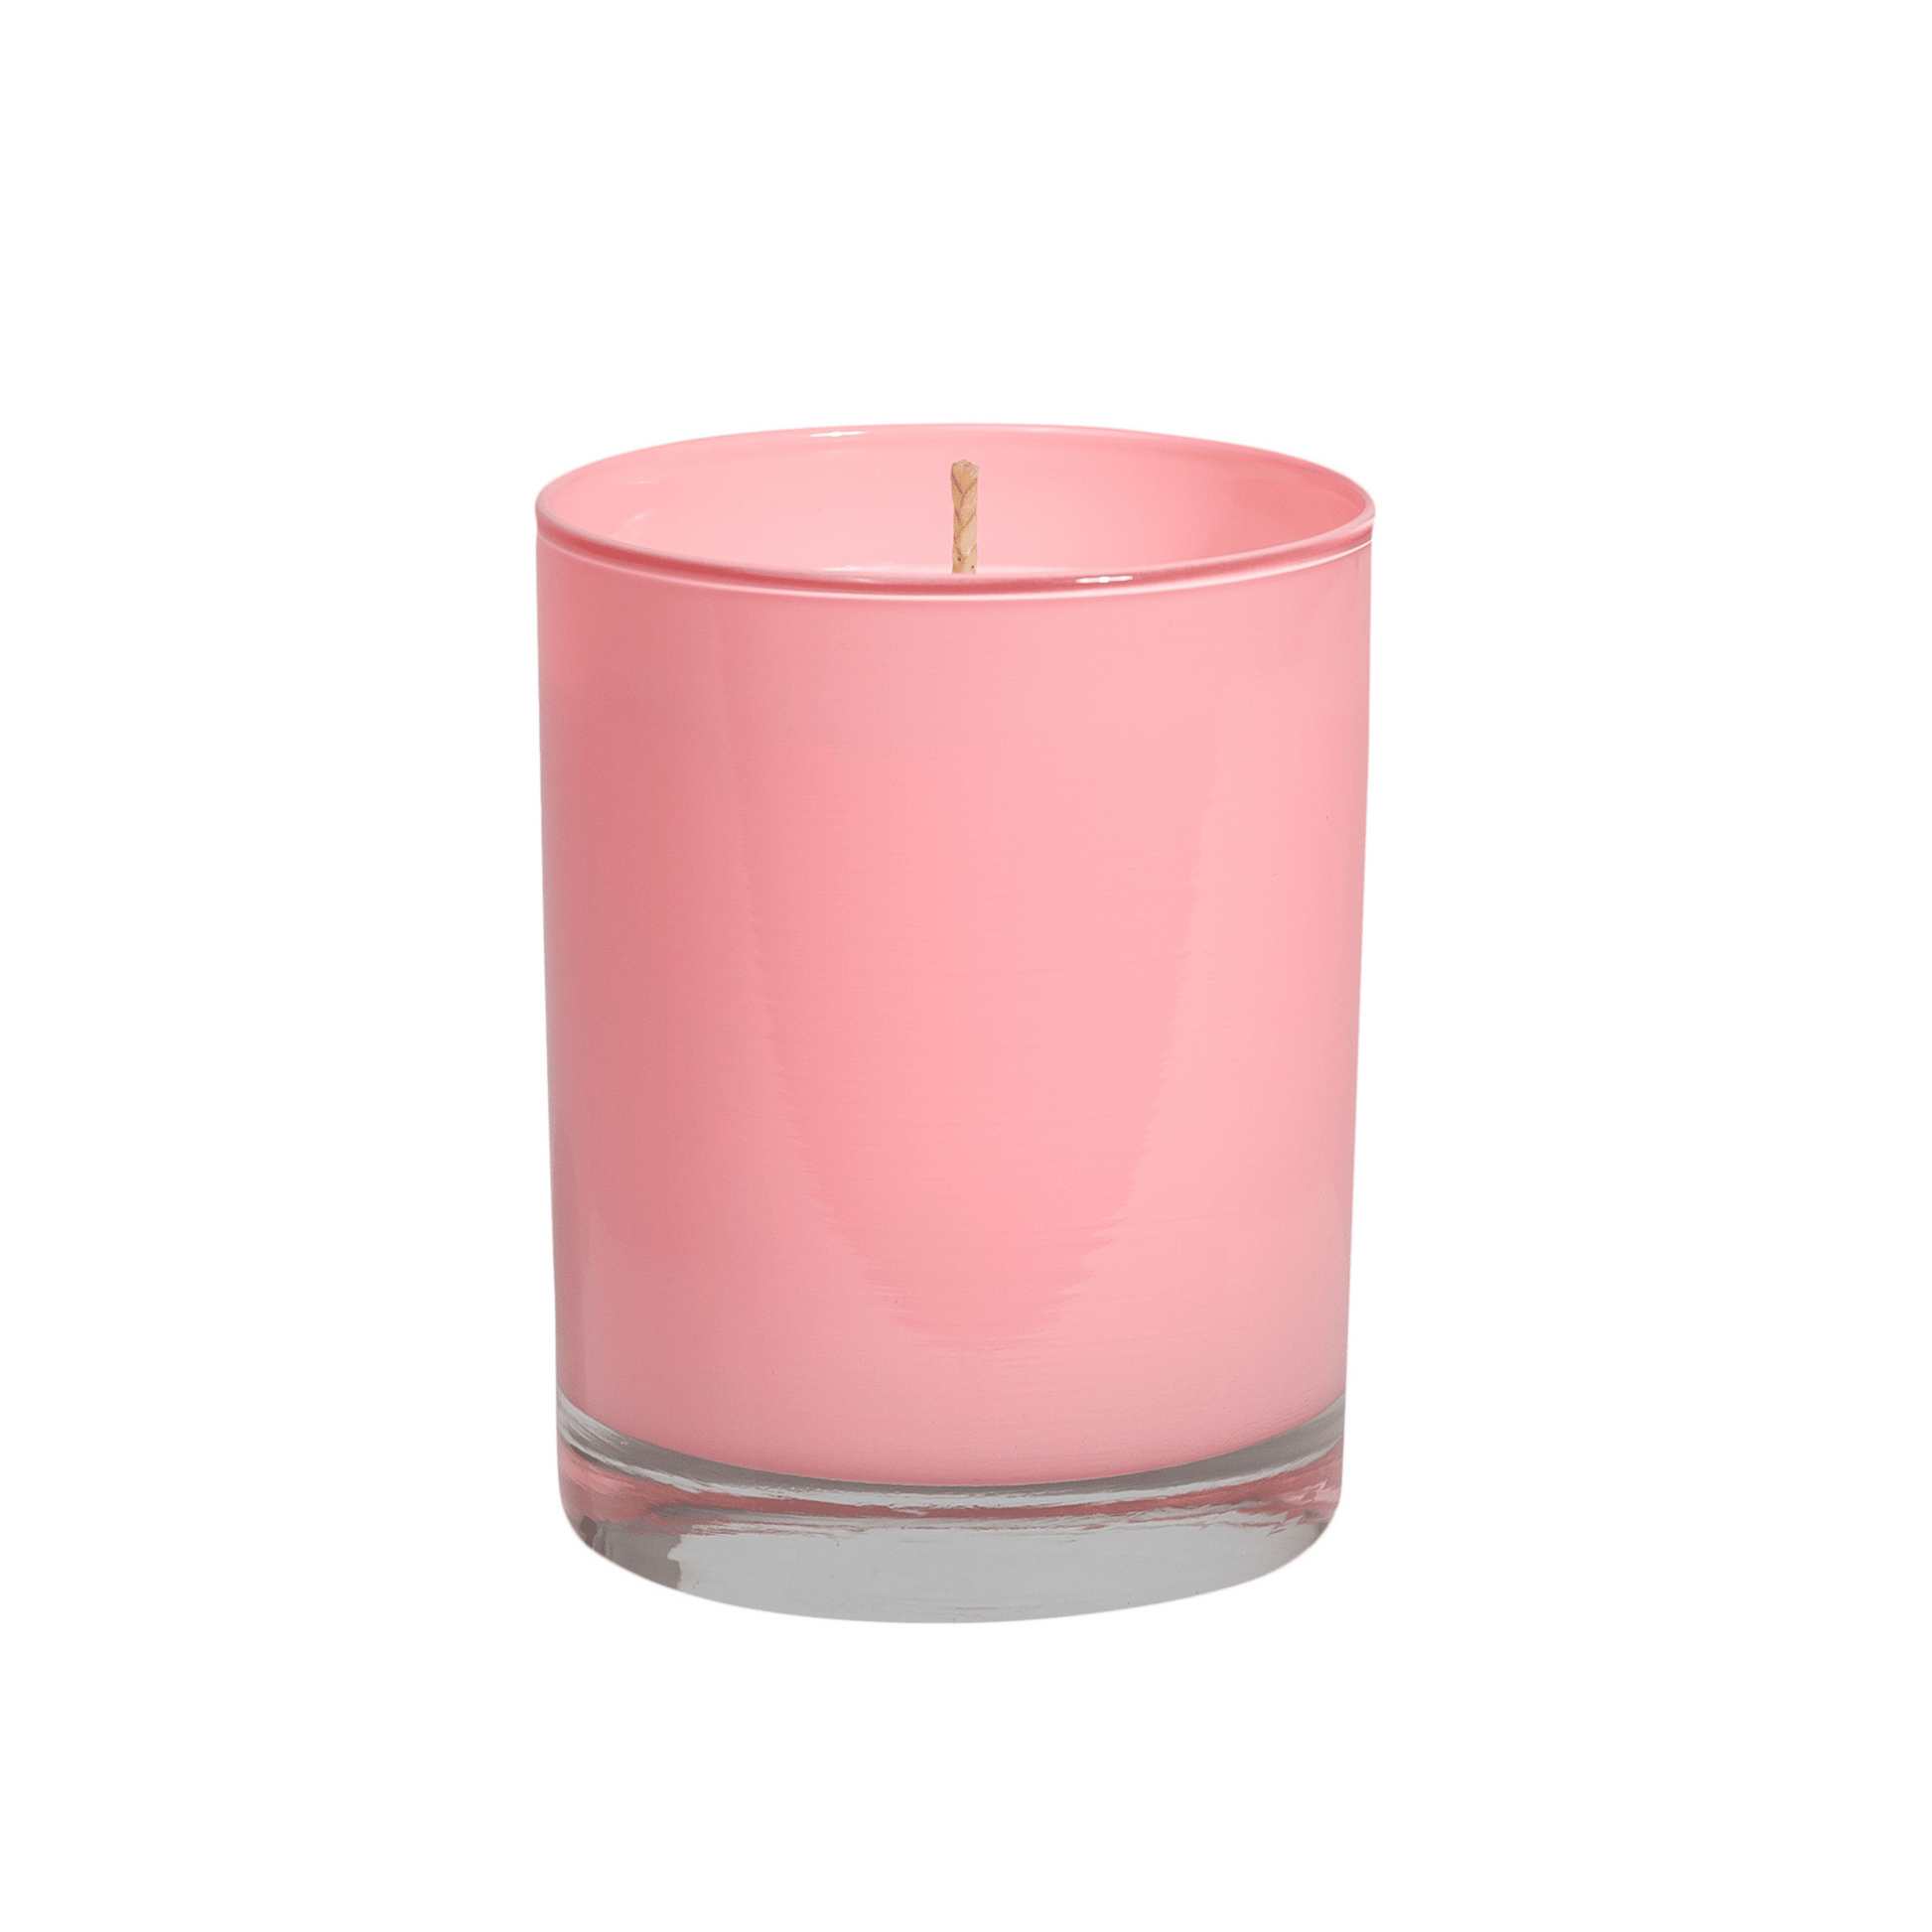 Alternate Image of Canyon Road Trip 11 oz. Pure Soy Candle